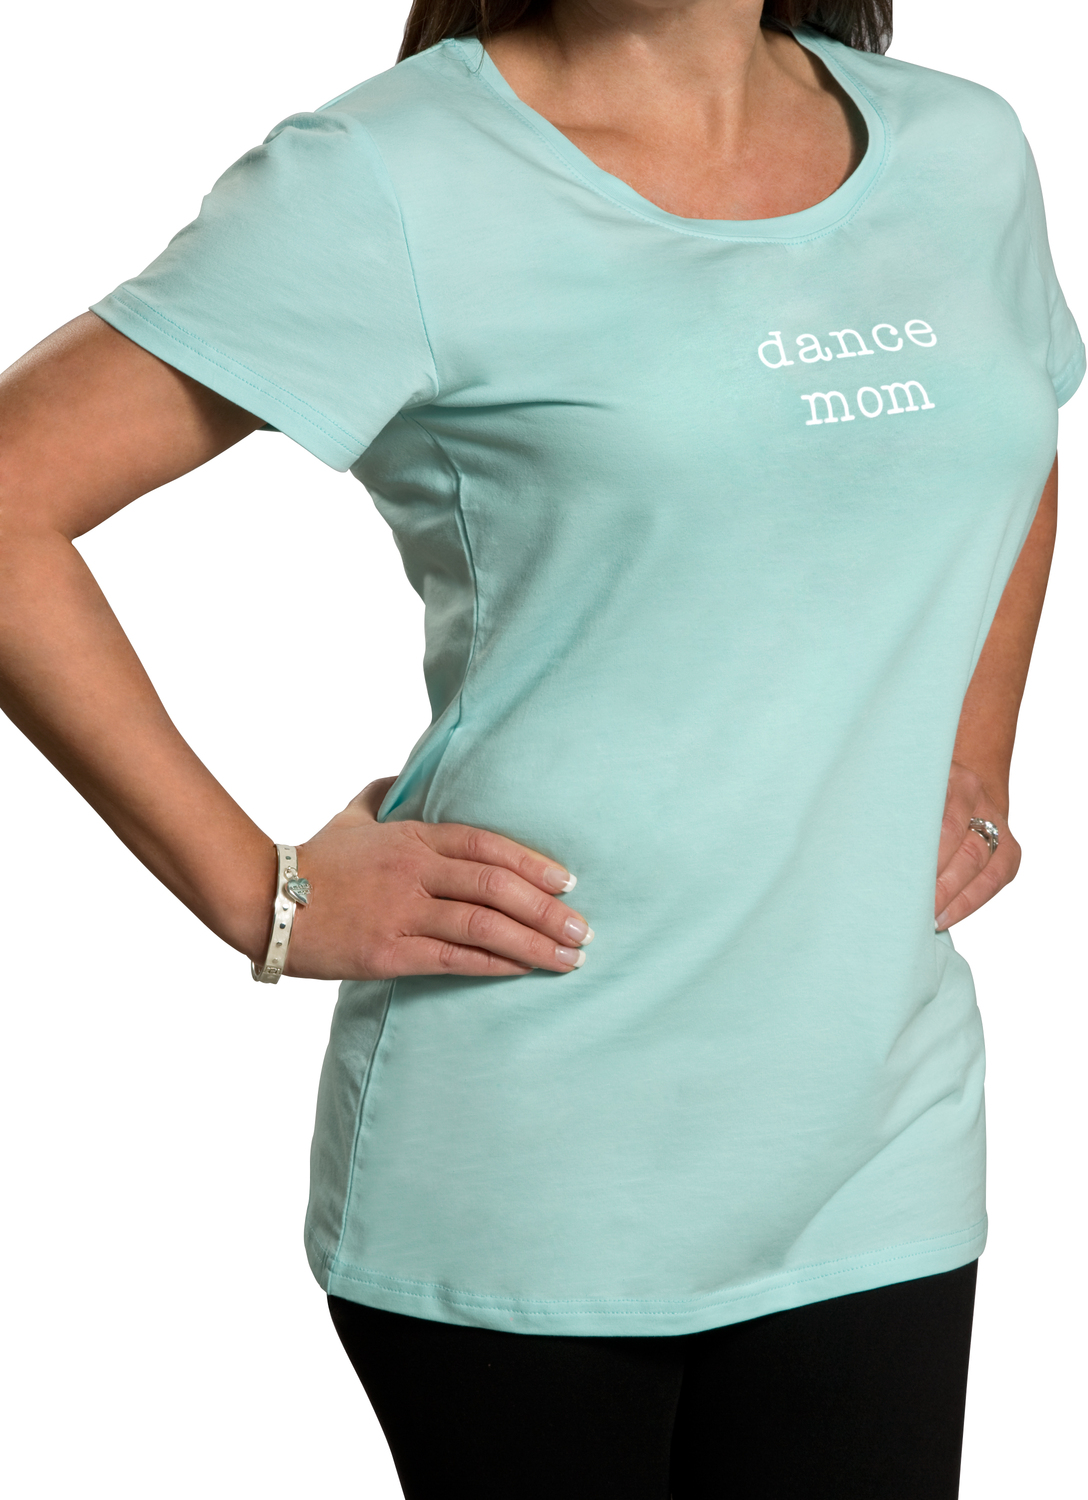 Dance Mom by Mom Love - Dance Mom - Small Teal/Mint Green T-Shirt